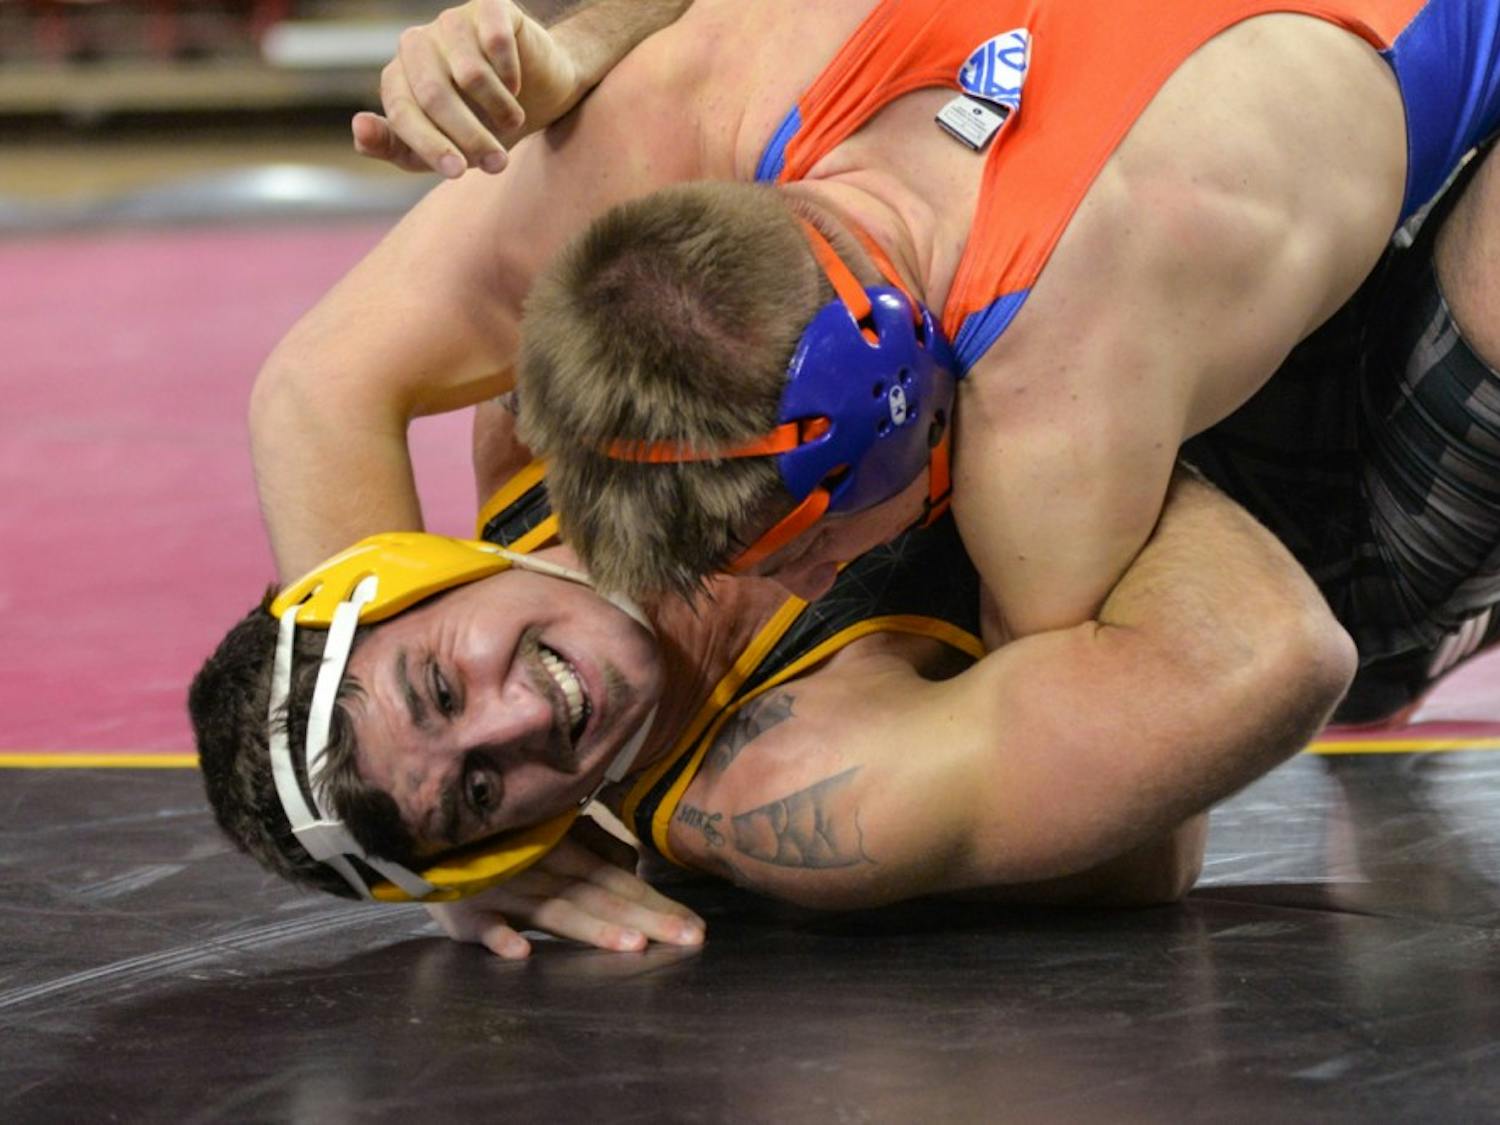 Sun Devil Senior Josh DaSilveira and  Chili Sabin from Boise State wrestle in a match on Sunday, Nov. 21, 2015, at the Wells Fargo  Arena in Tempe.